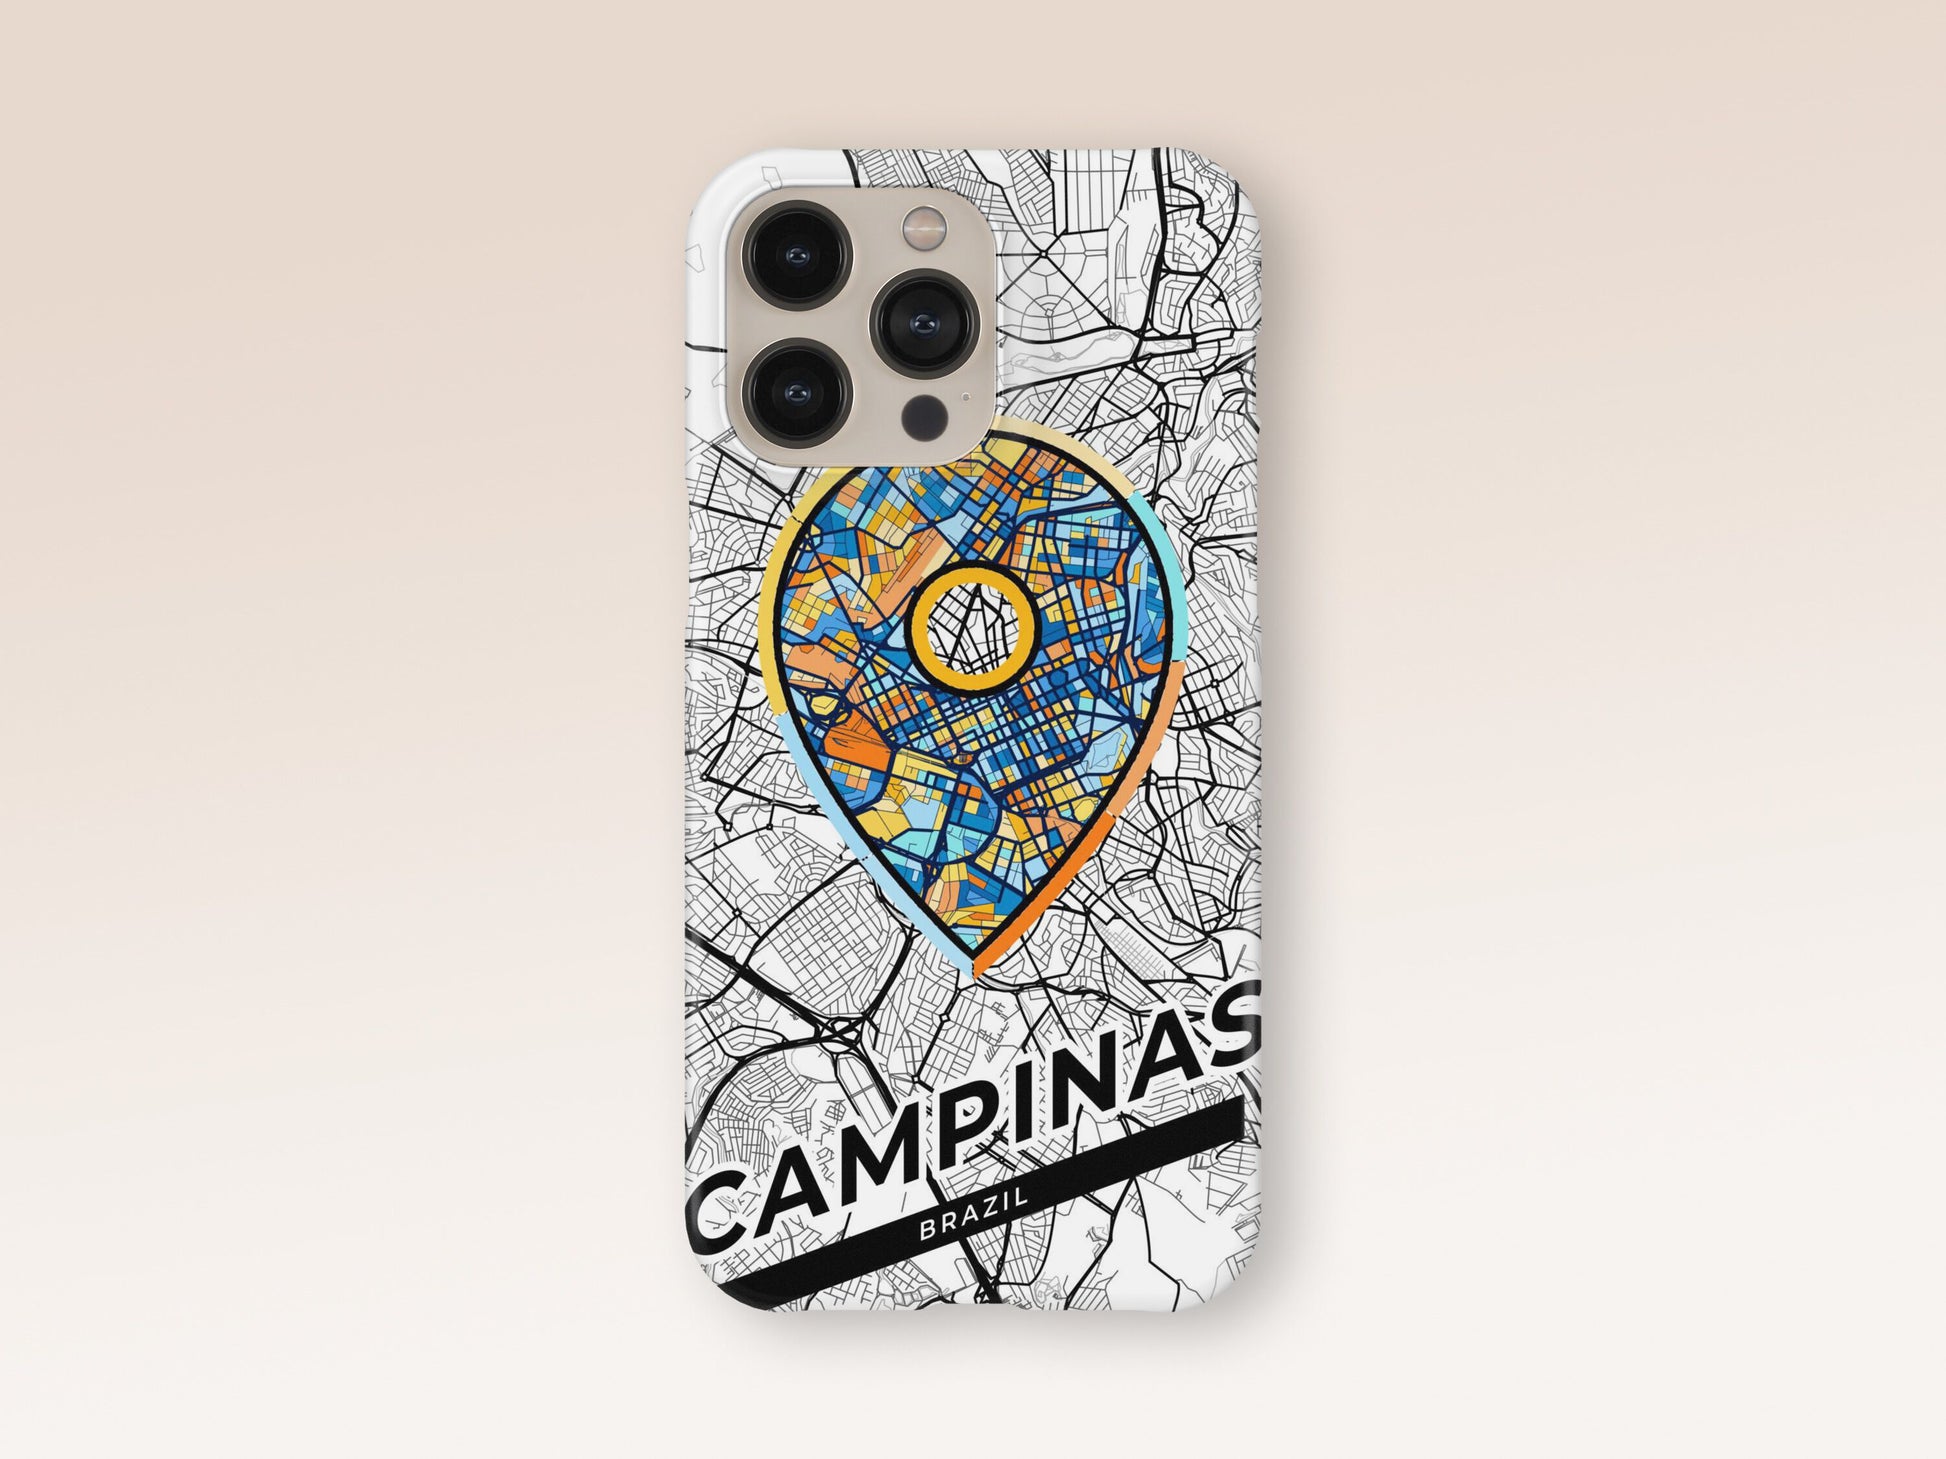 Campinas Brazil slim phone case with colorful icon. Birthday, wedding or housewarming gift. Couple match cases. 1